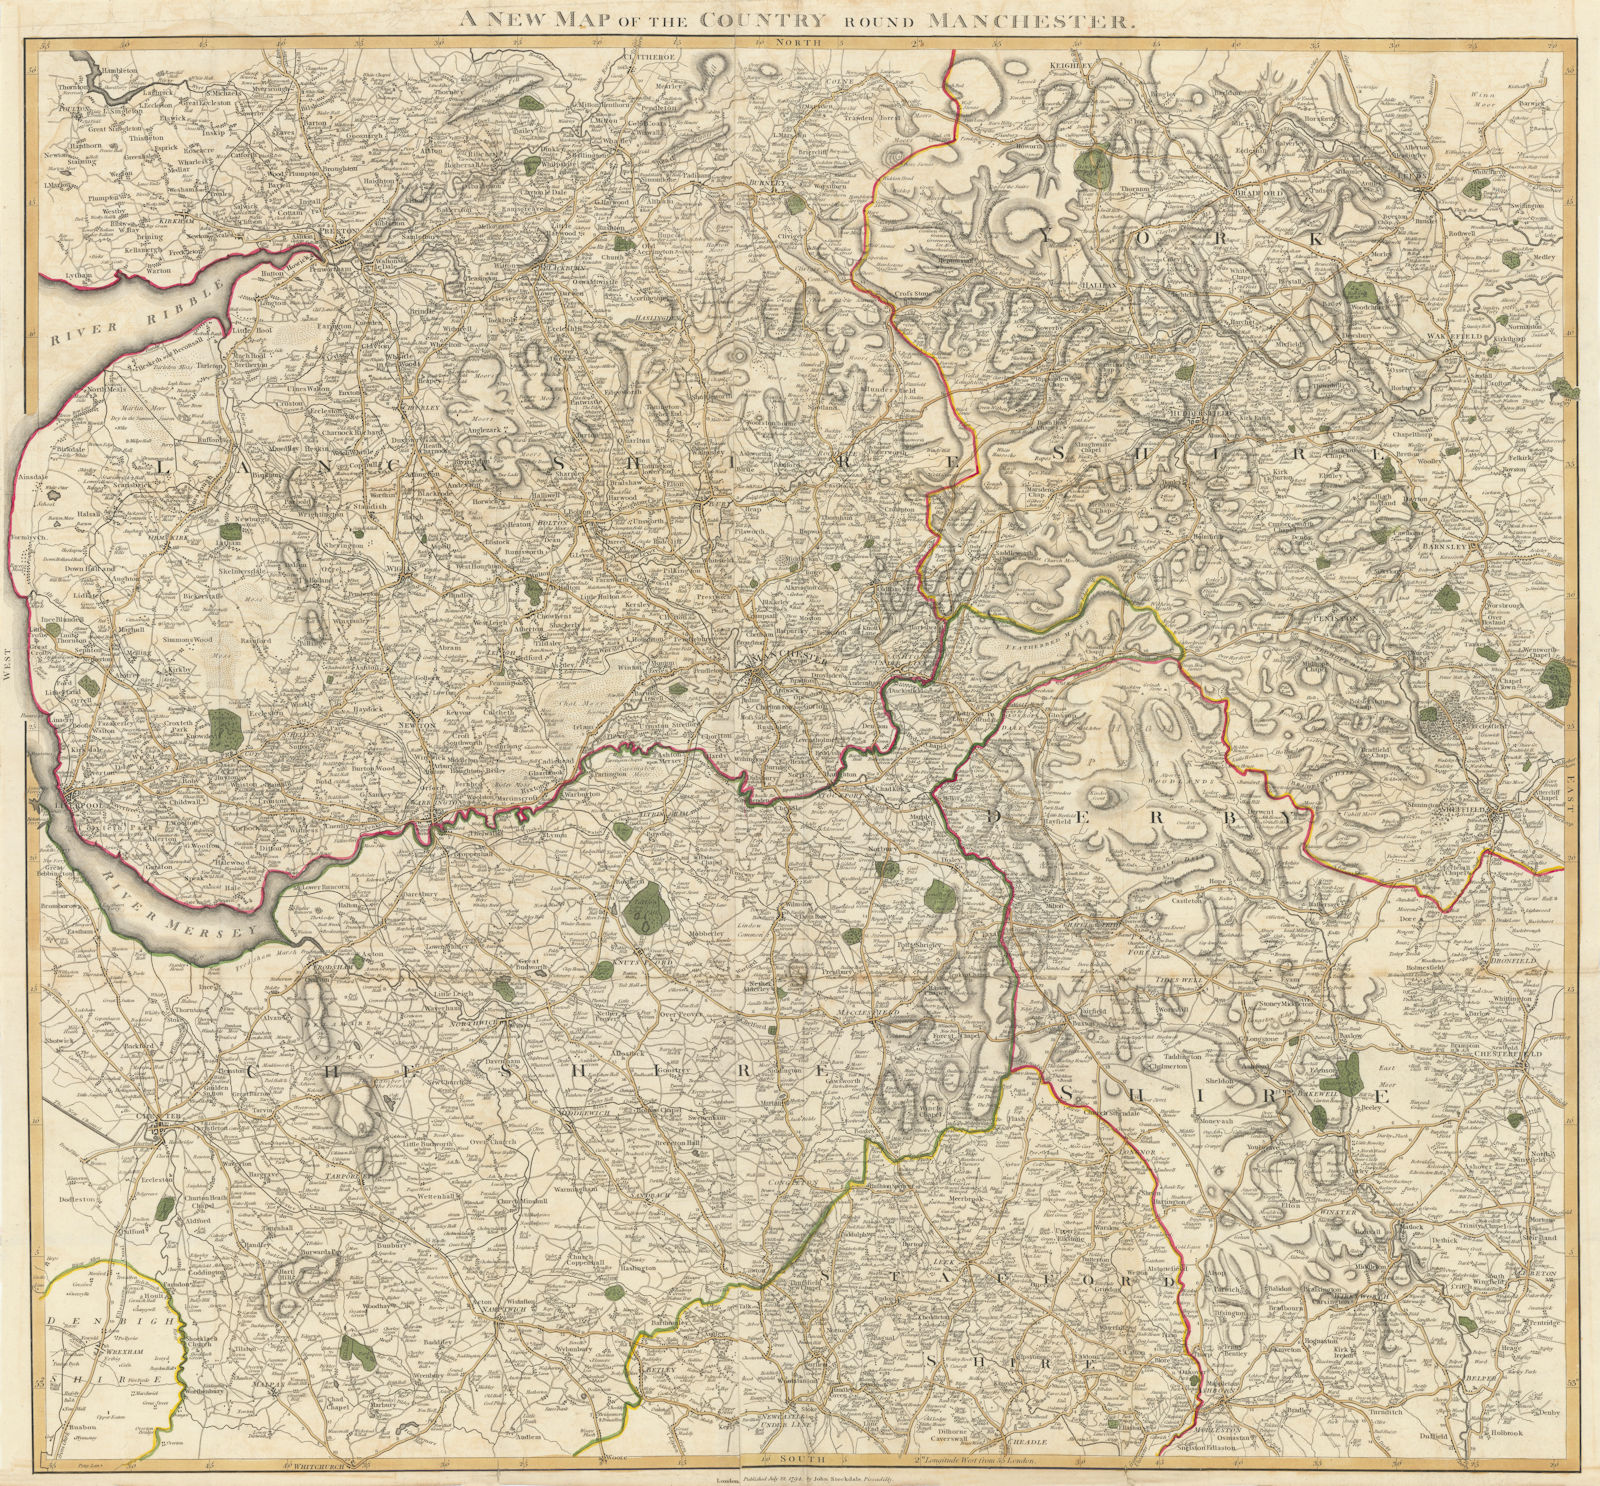 A new map of the country round Manchester. NW England. 85x80cm. STOCKDALE 1794